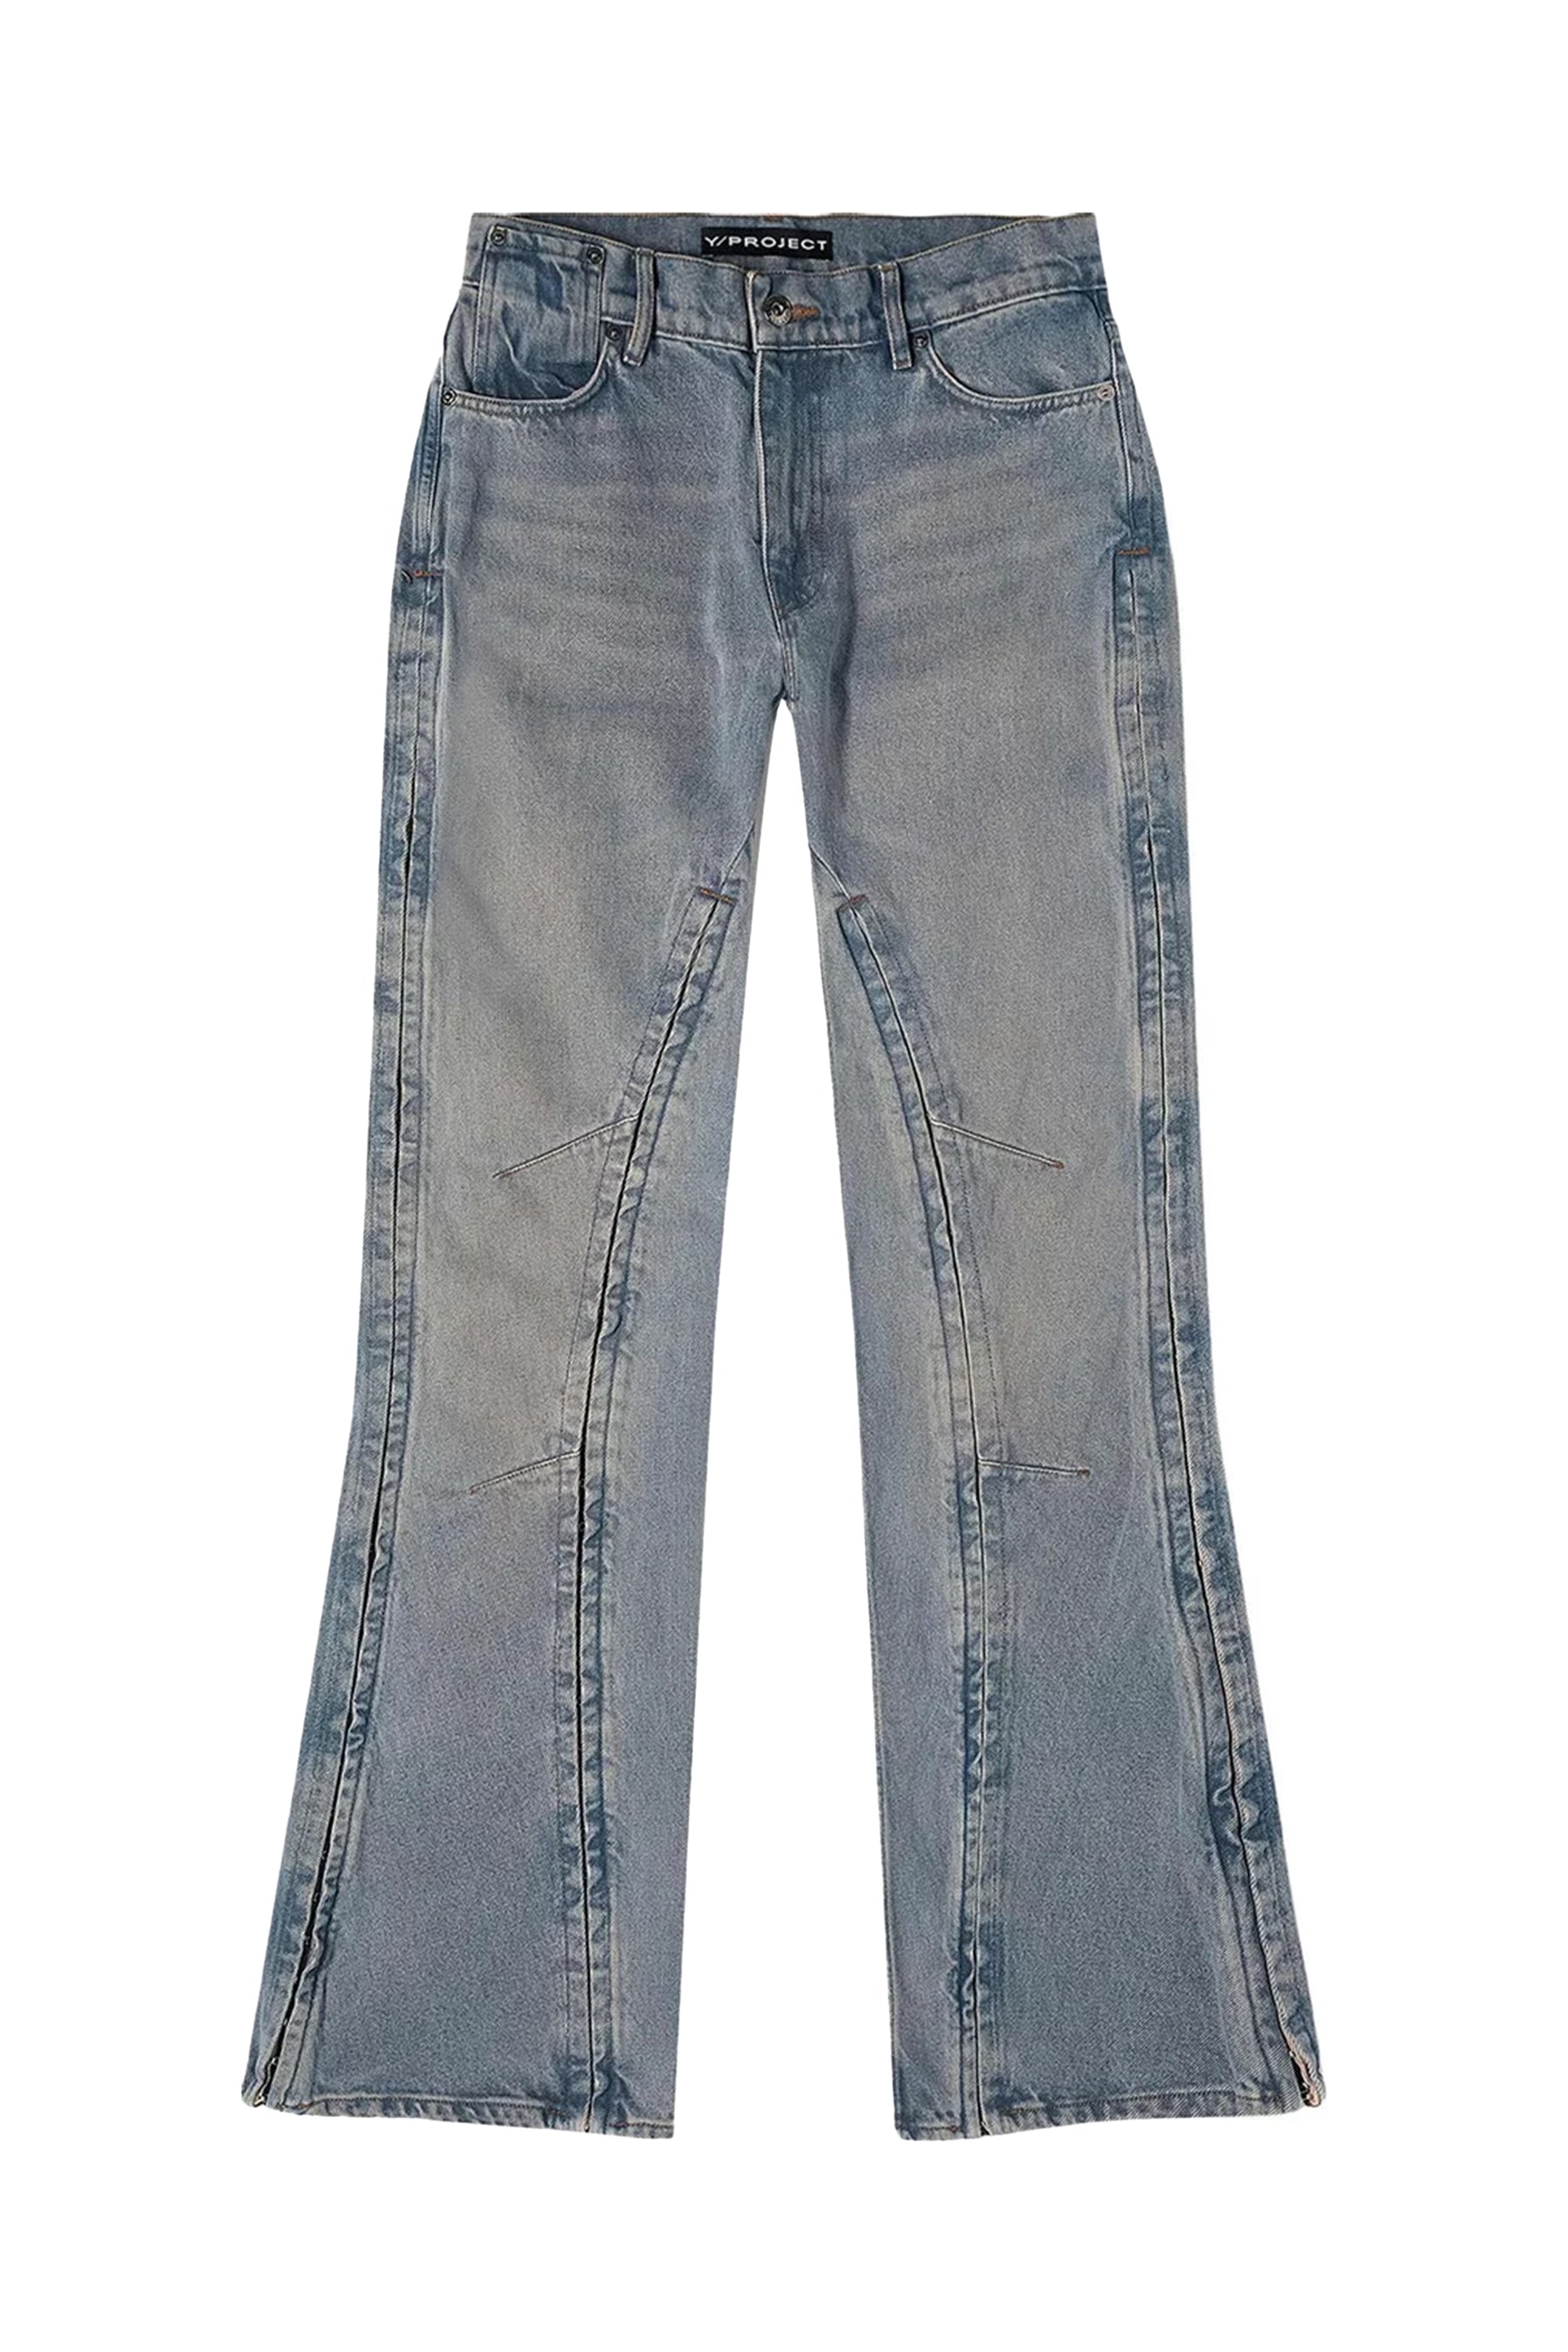 Y/PROJECT ワイプロジェクト SS24 HOOK AND EYE SLIM JEANS / PNK - NUBIAN